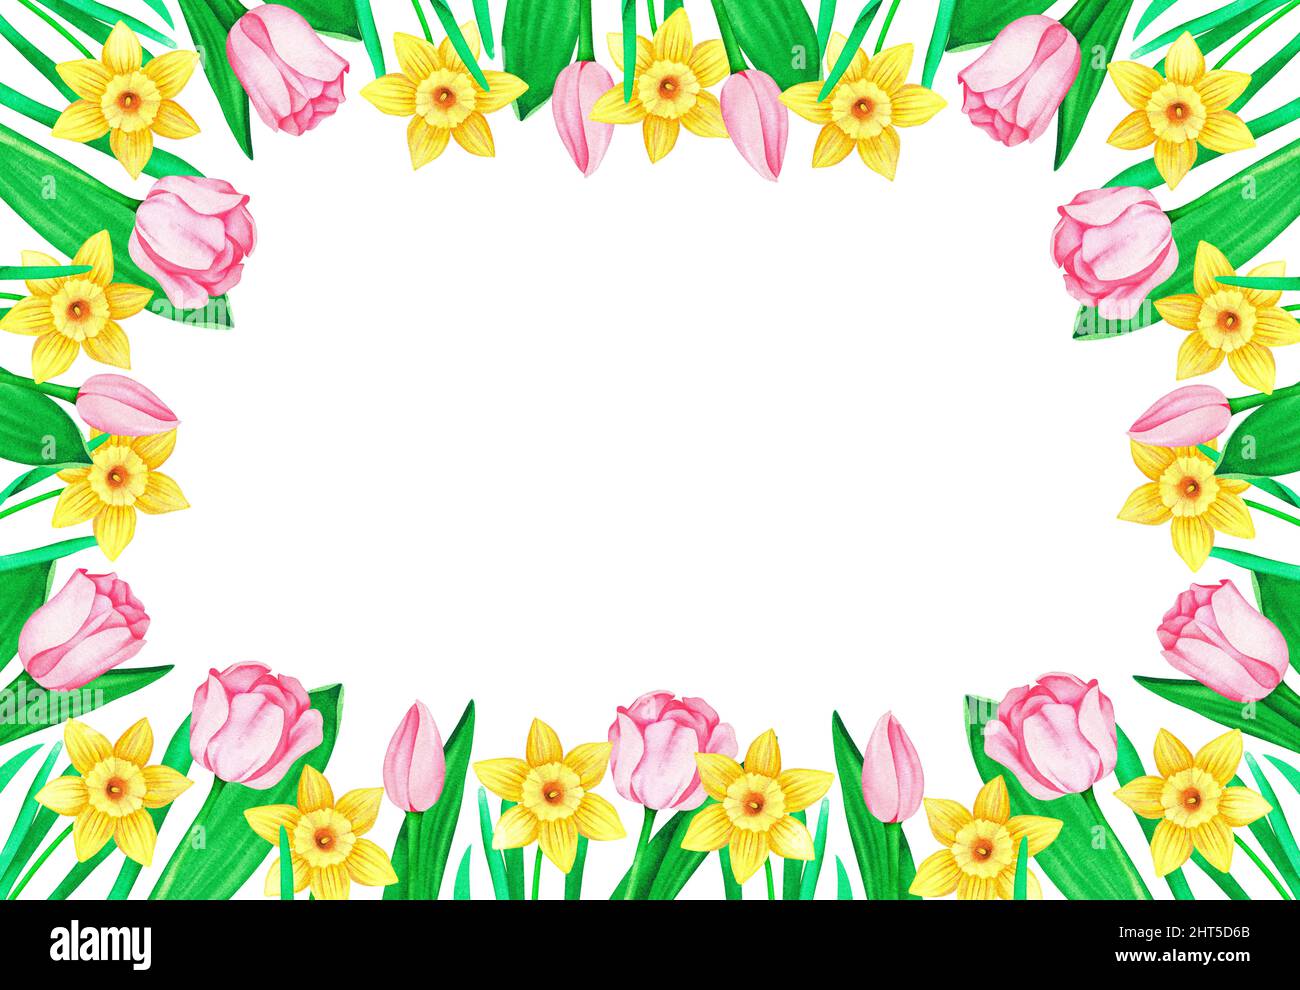 A rectangular frame of daffodils and tulips. Watercolor vintage illustration. Isolated on a white background. For your design wedding invitations. Stock Photo